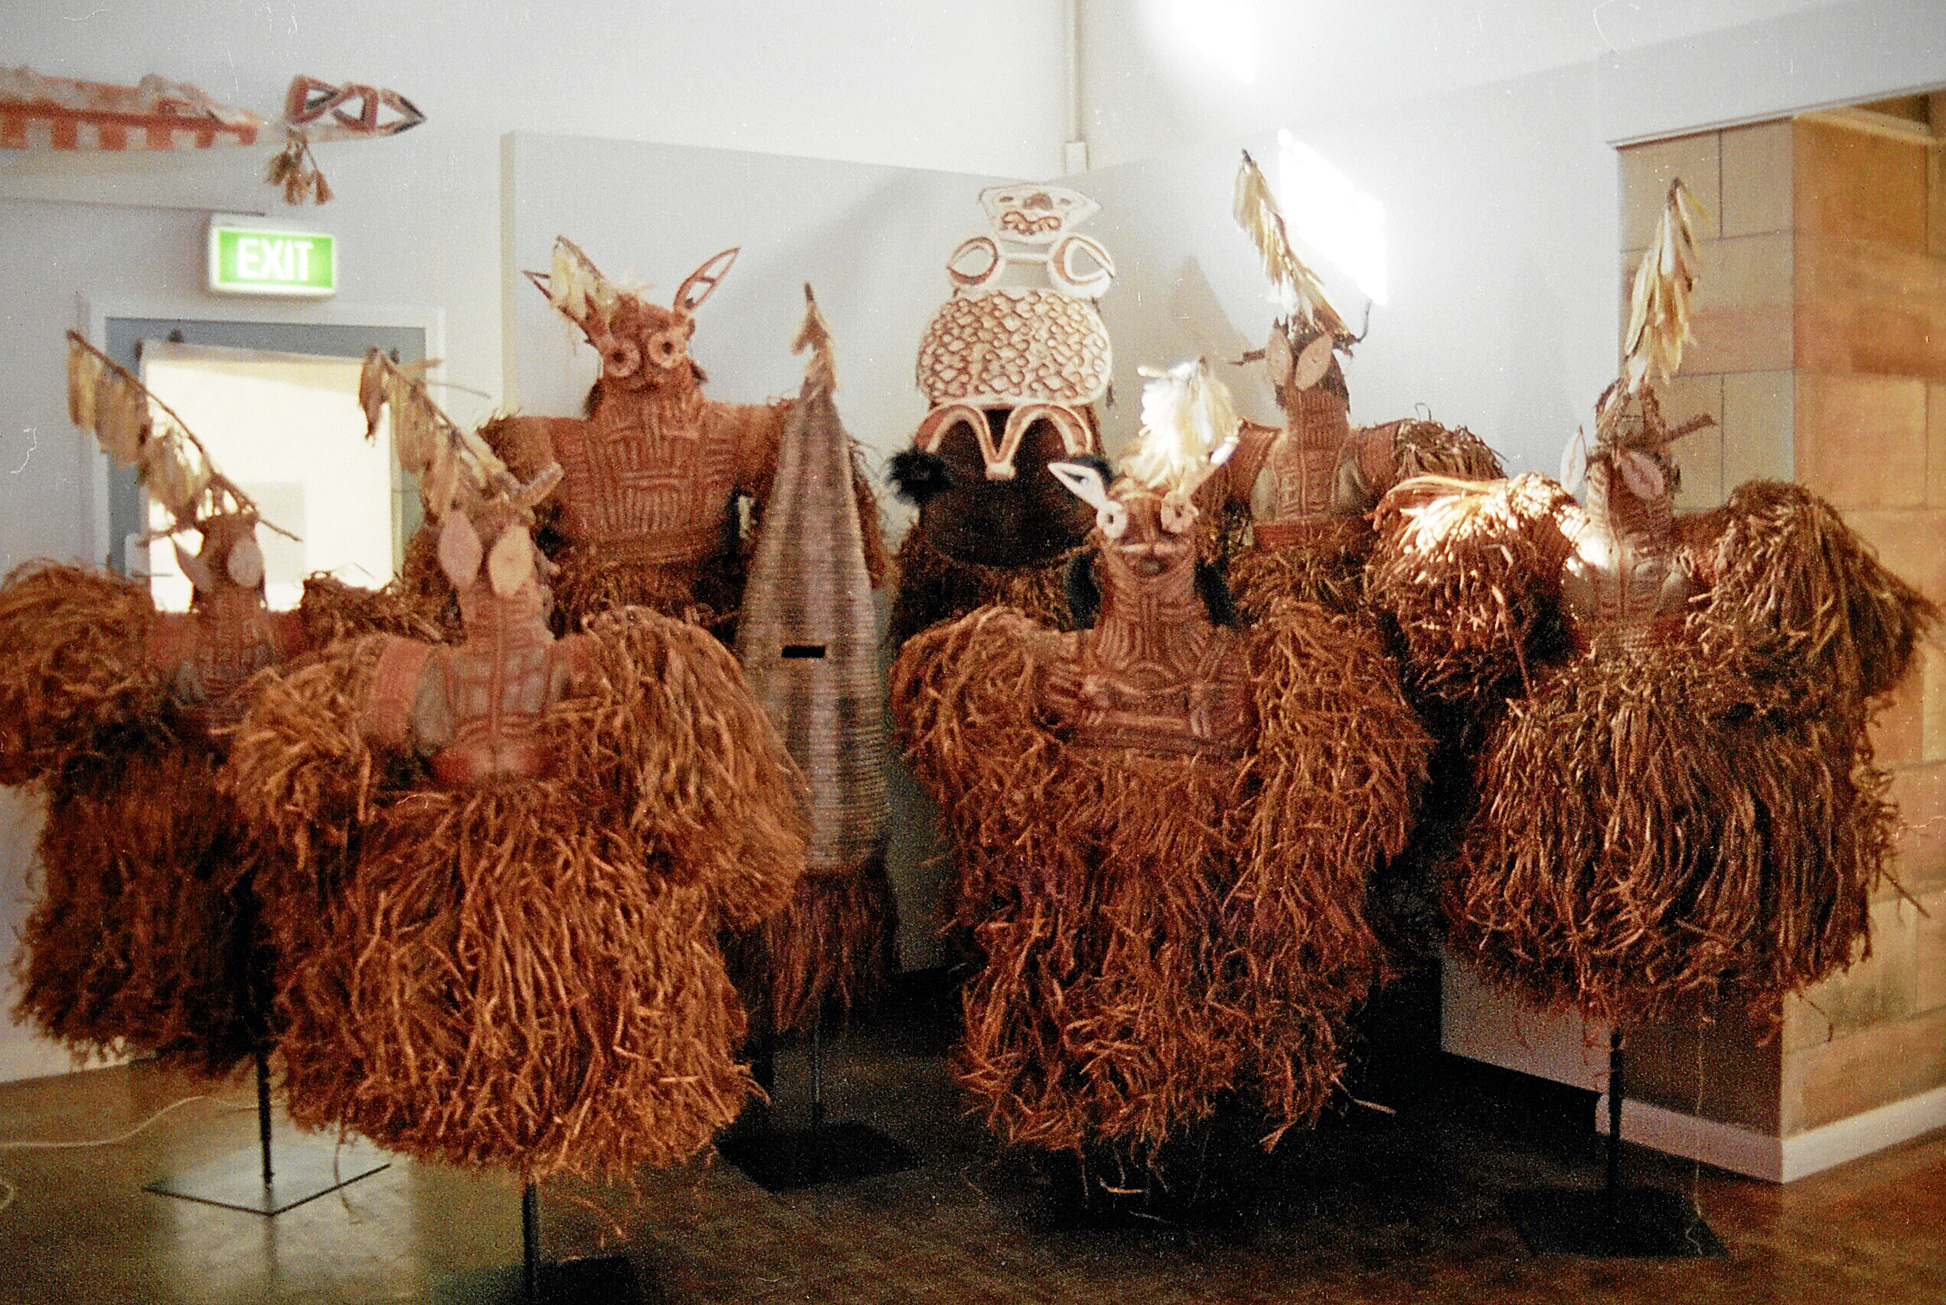 Exhibition: The Monumental Sculpture of West Papua Sydney College of the Arts Sydney 2000